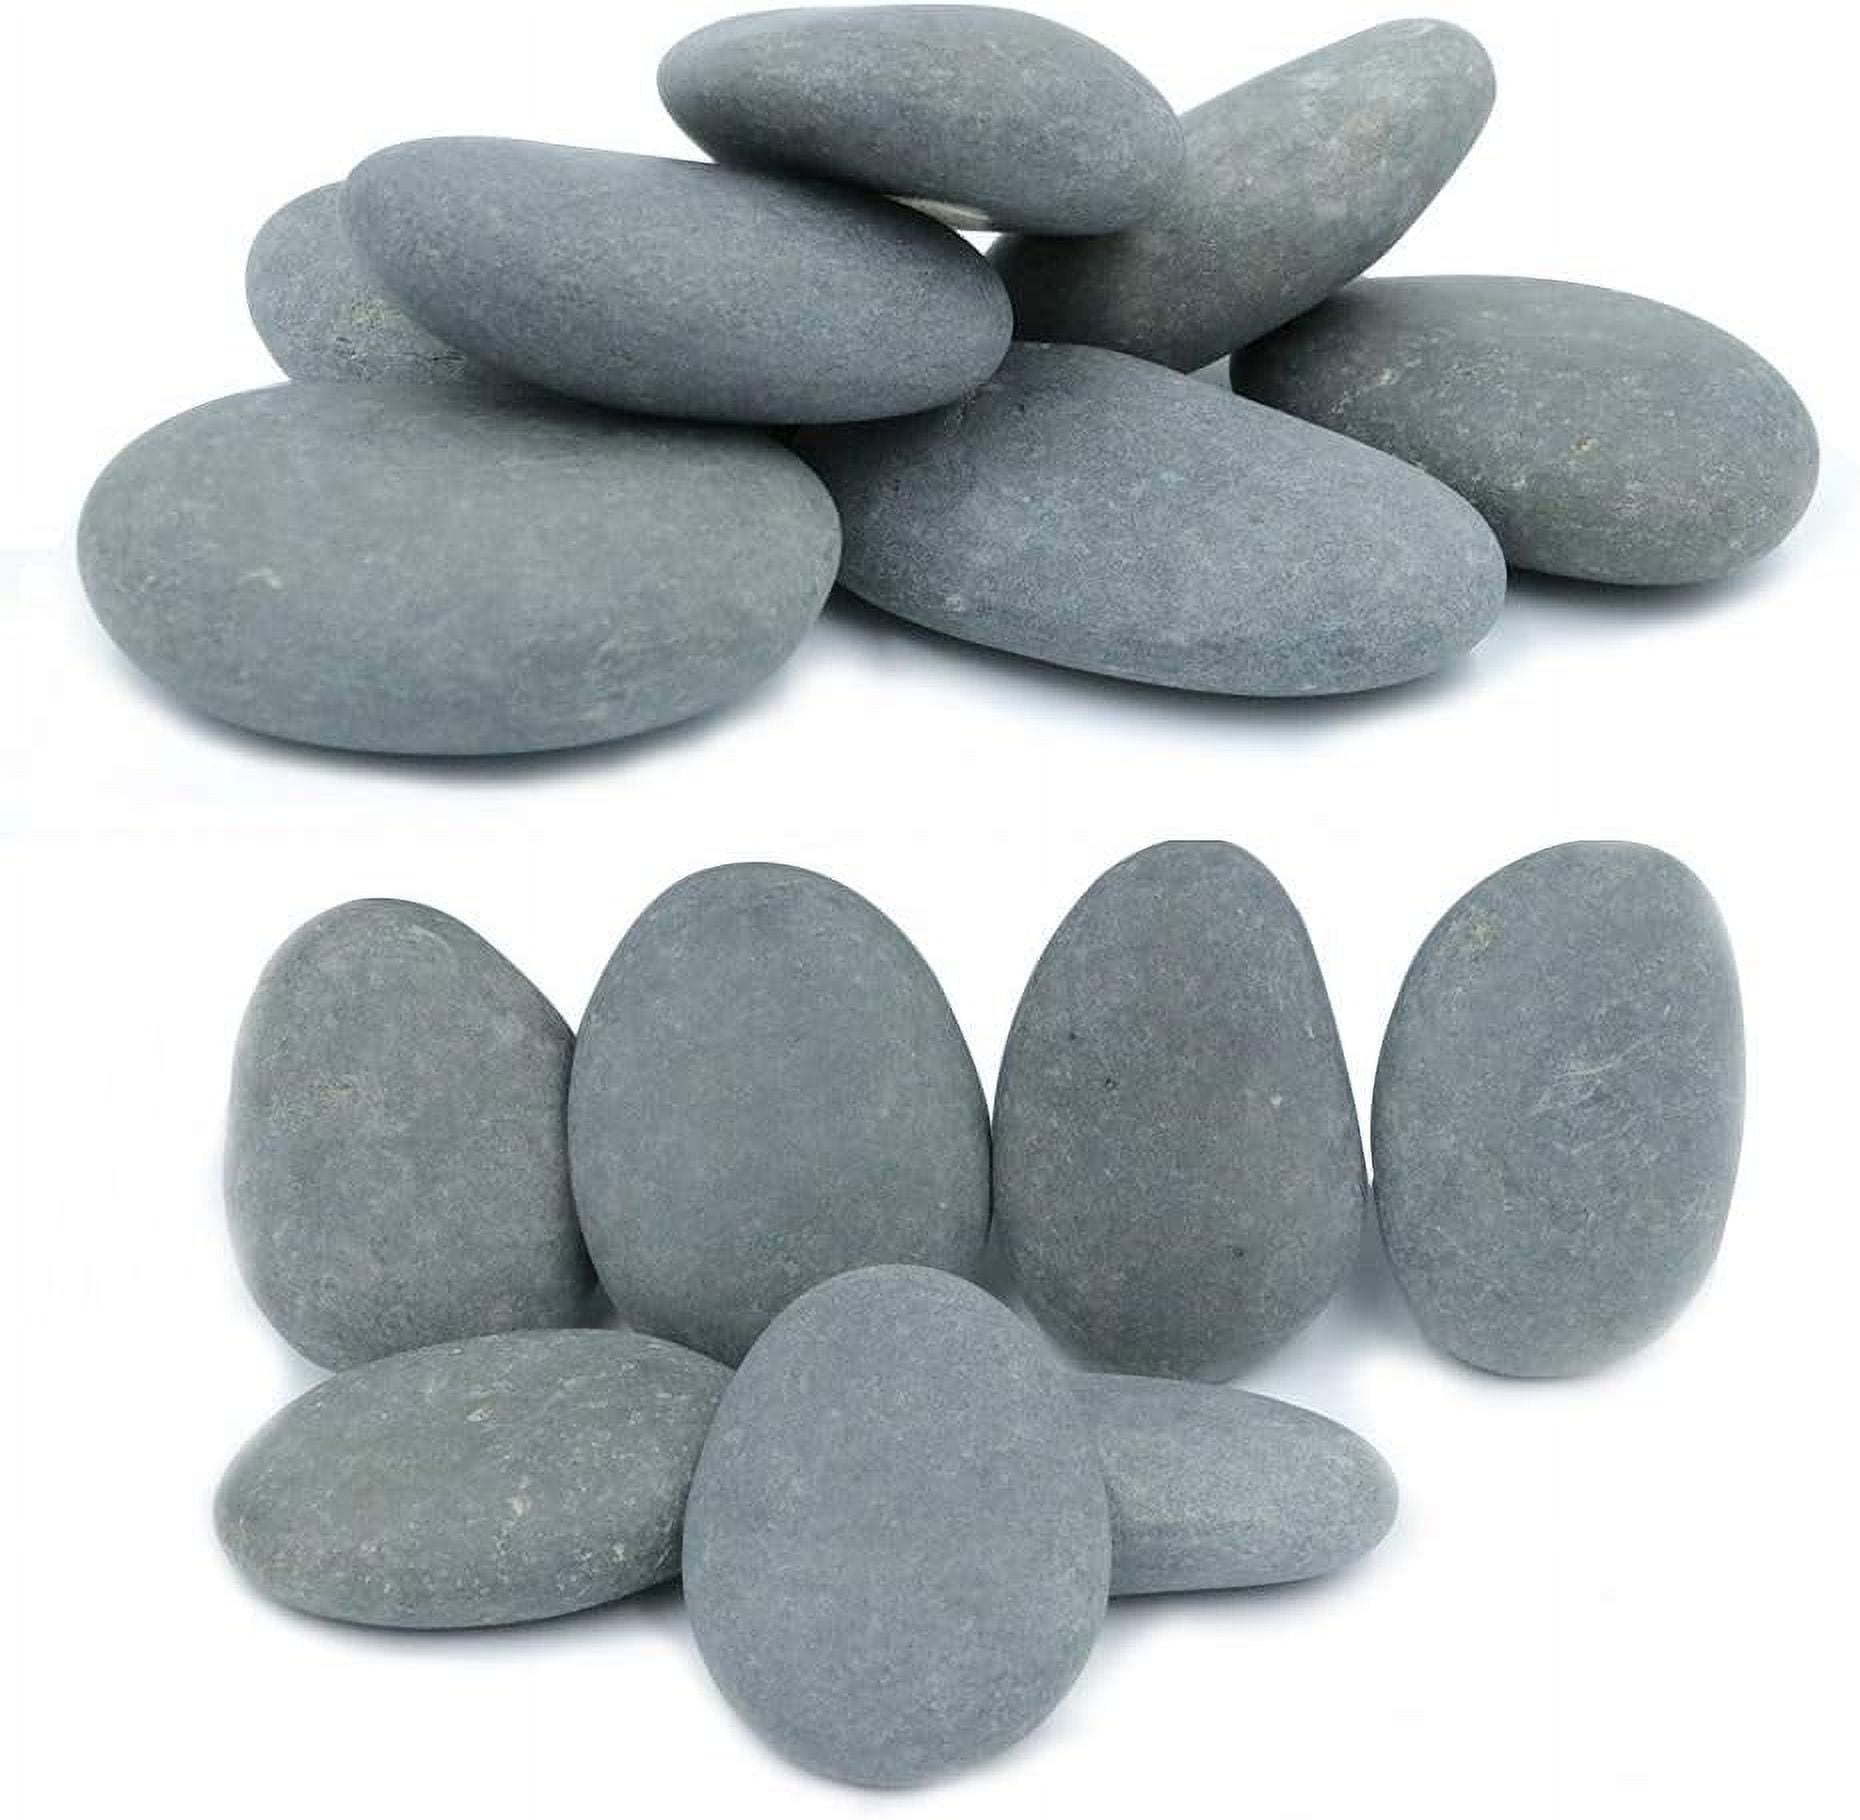 Koltose by Mash - Craft Rocks for Painting, 100% Natural XL Multi-Colored  Stones, 3.5” - 4.5” inch, Set of 12